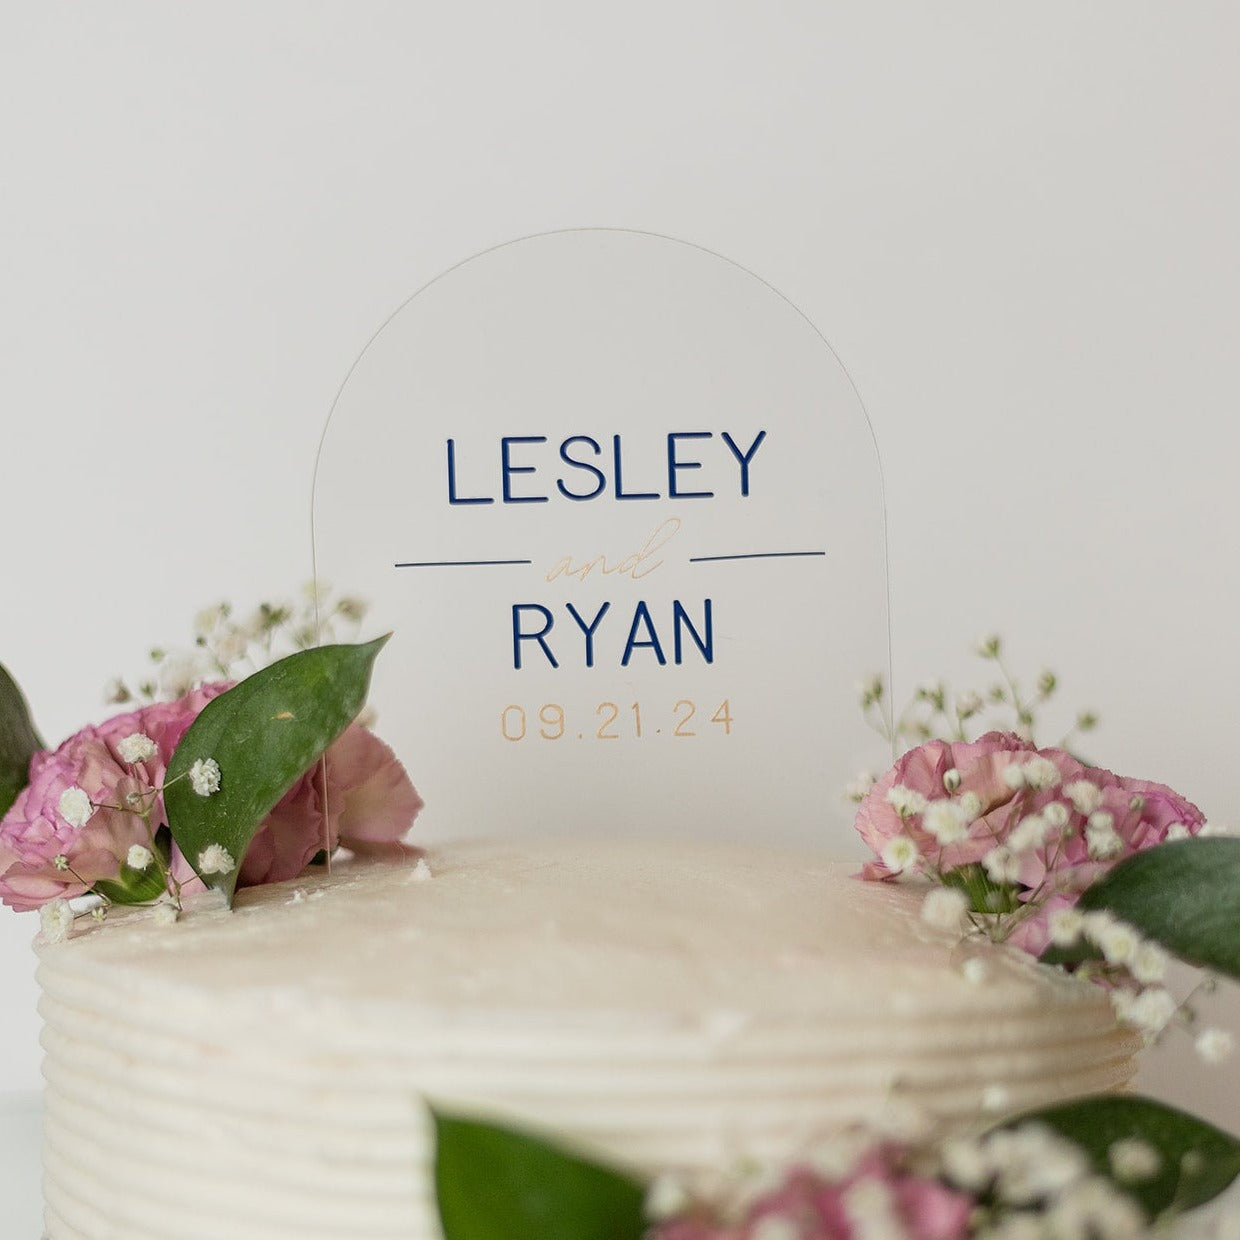 A clear, arch shaped cake topper sits on top of a white cake with pink flowers, sprigs of baby's breath and dark green leaves. The cake topper reads "Lesley and Ryan, 09.21.24".